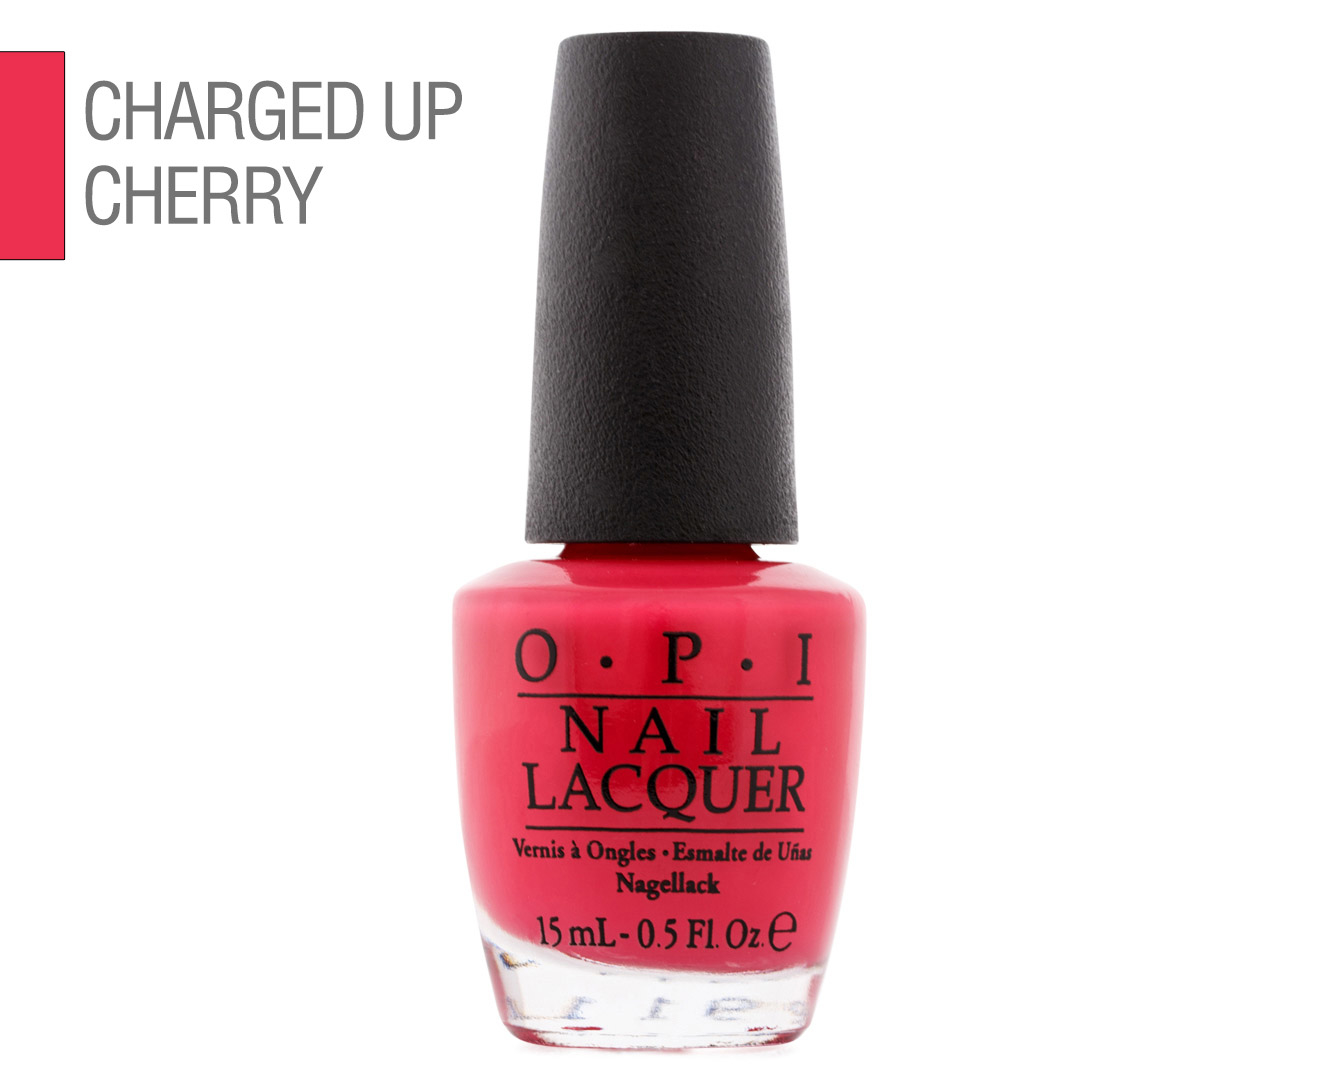 OPI Nail Lacquer, Cherry - wide 4